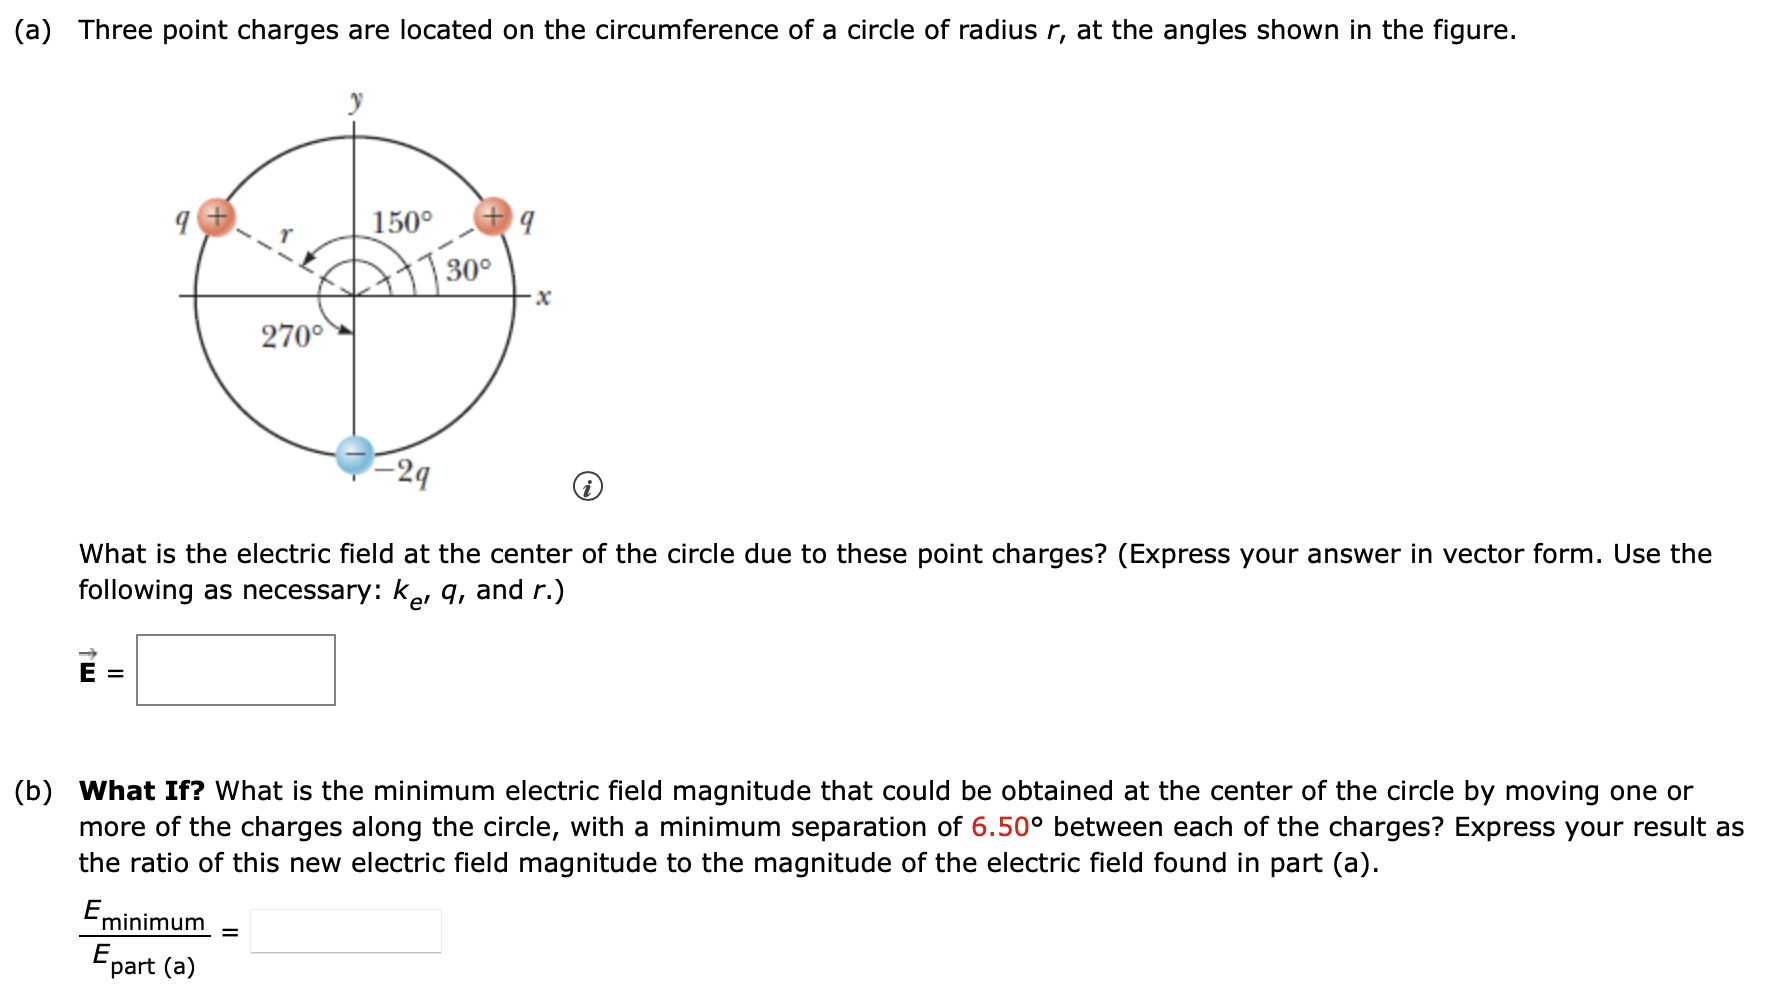 (a) Three point charges are located on the circumference of a circle of radius r, at the angles shown in the figure. What is the electric field at the center of the circle due to these point charges? (Express your answer in vector form. Use the following as necessary: ke, q, and r. ) E→ = (b) What If? What is the minimum electric field magnitude that could be obtained at the center of the circle by moving one or more of the charges along the circle, with a minimum separation of 6.50∘ between each of the charges? Express your result as the ratio of this new electric field magnitude to the magnitude of the electric field found in part (a). Eminimum Epart (a) =